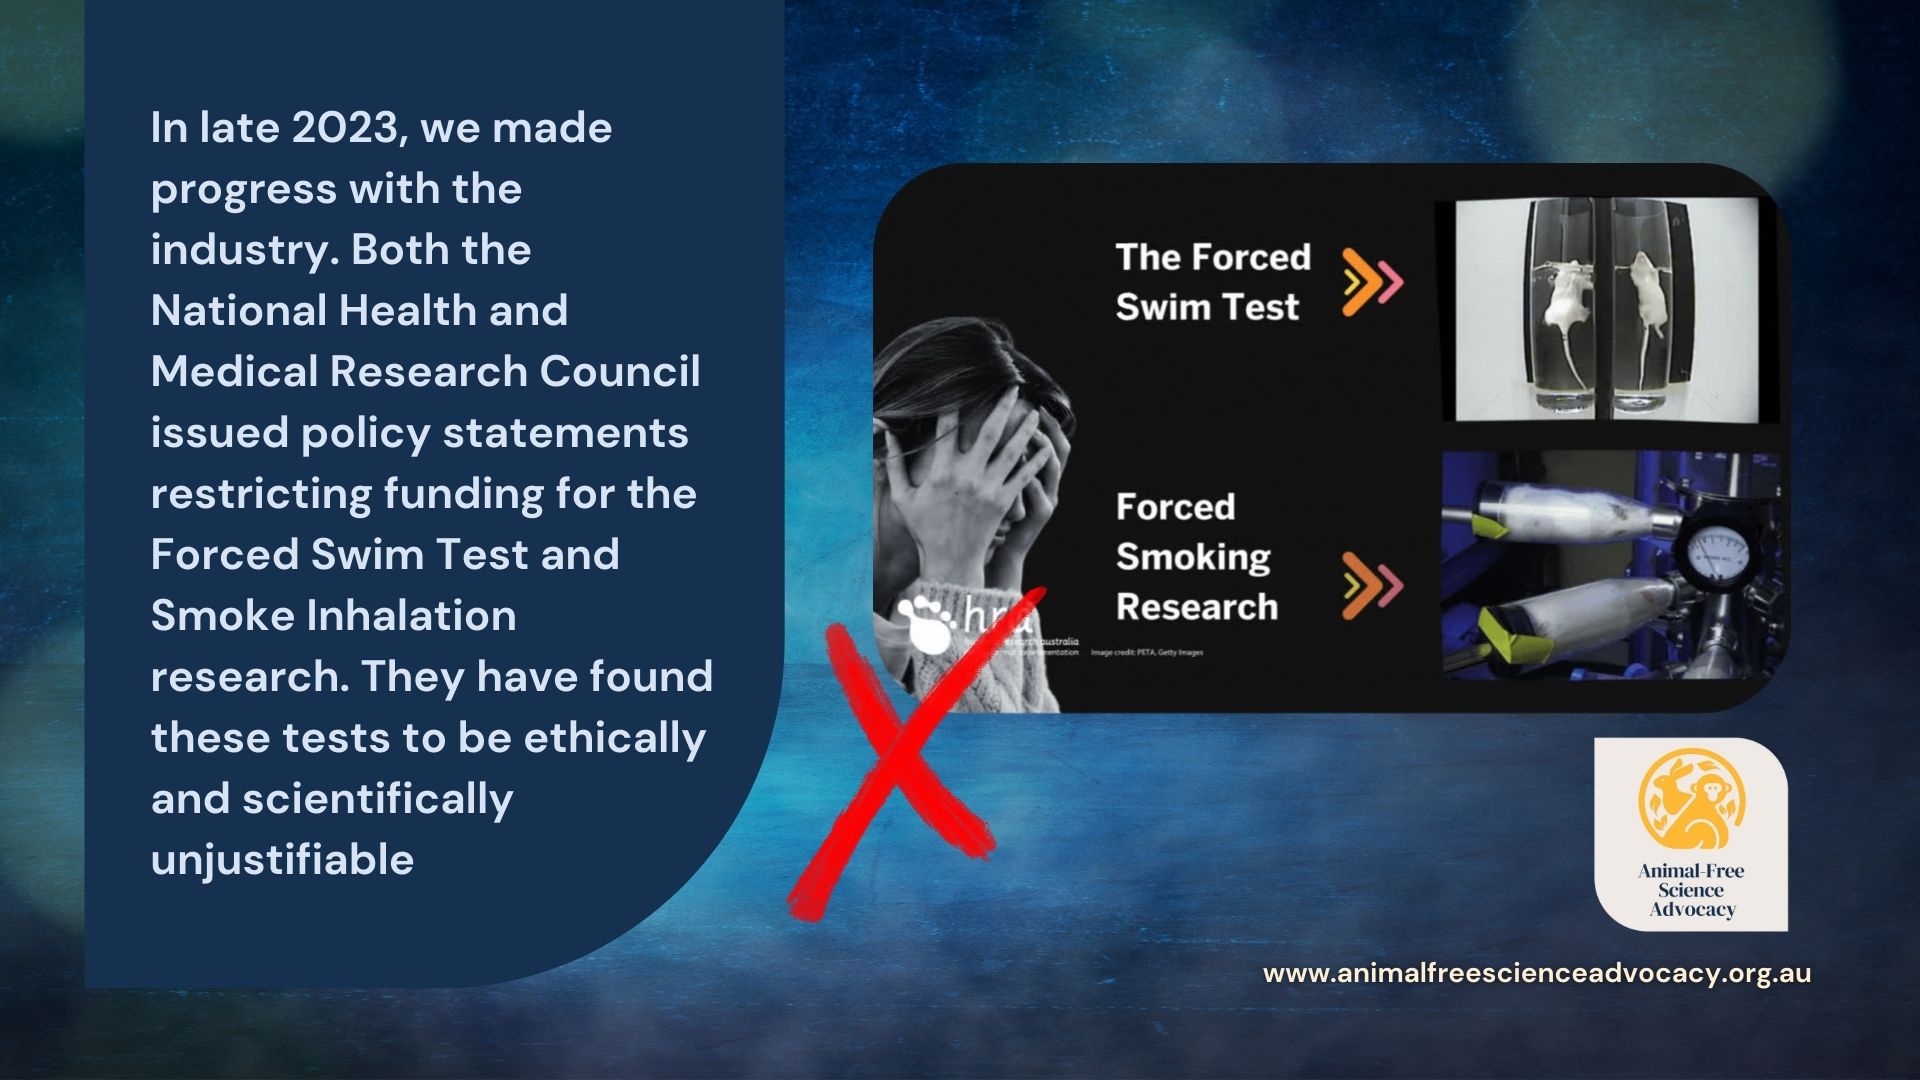 Ending funding of Forced Swim and Forced Smoke Tests | Animal-Free Science Advocacy | 2023 Achievements